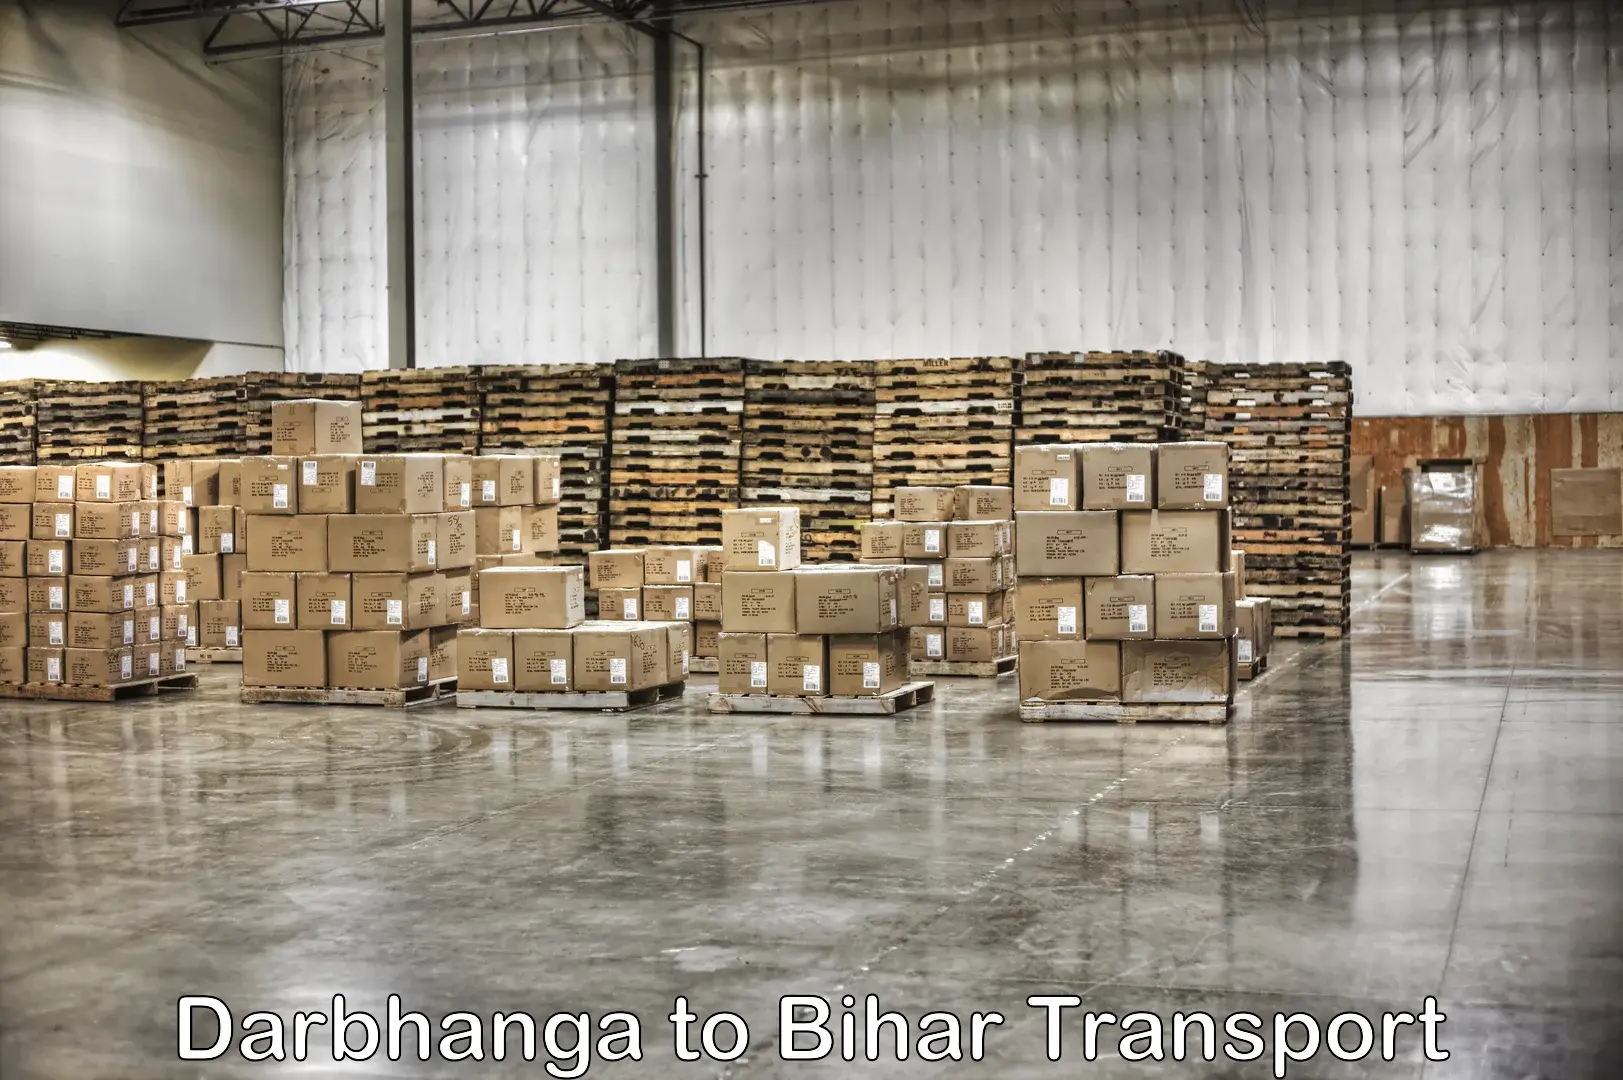 Road transport online services in Darbhanga to Bettiah